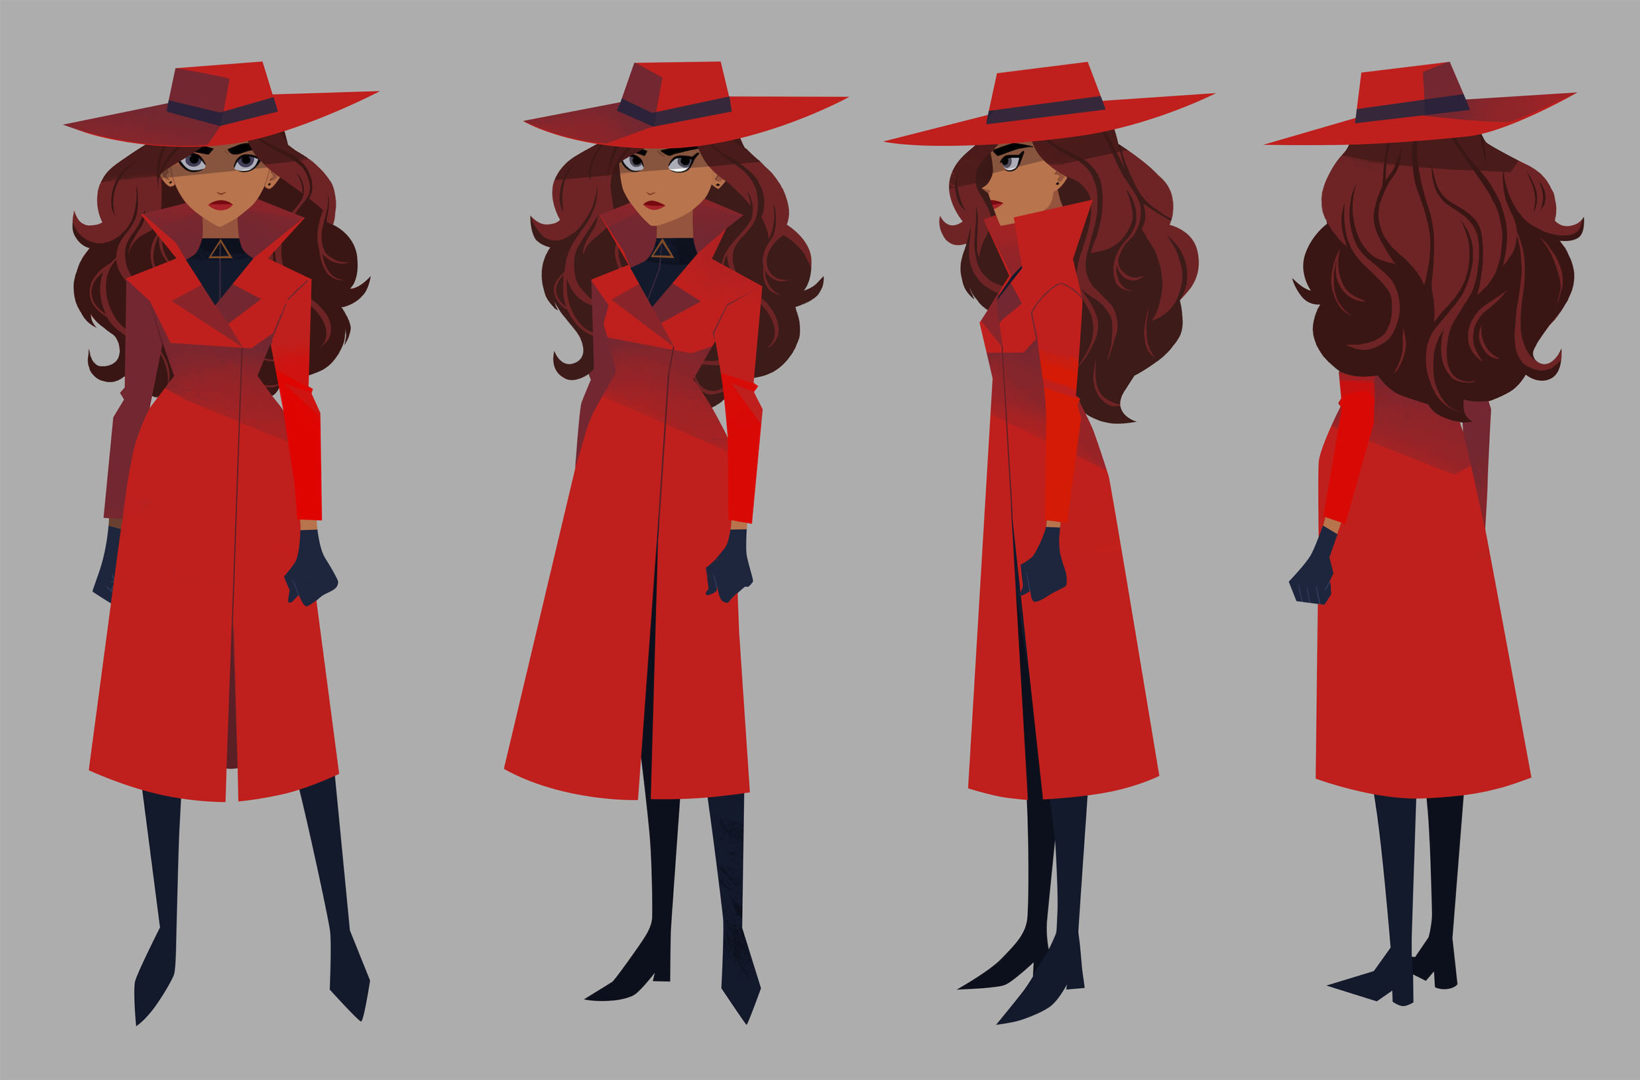 Modern Carmen Sandiego Outfit | peacecommission.kdsg.gov.ng